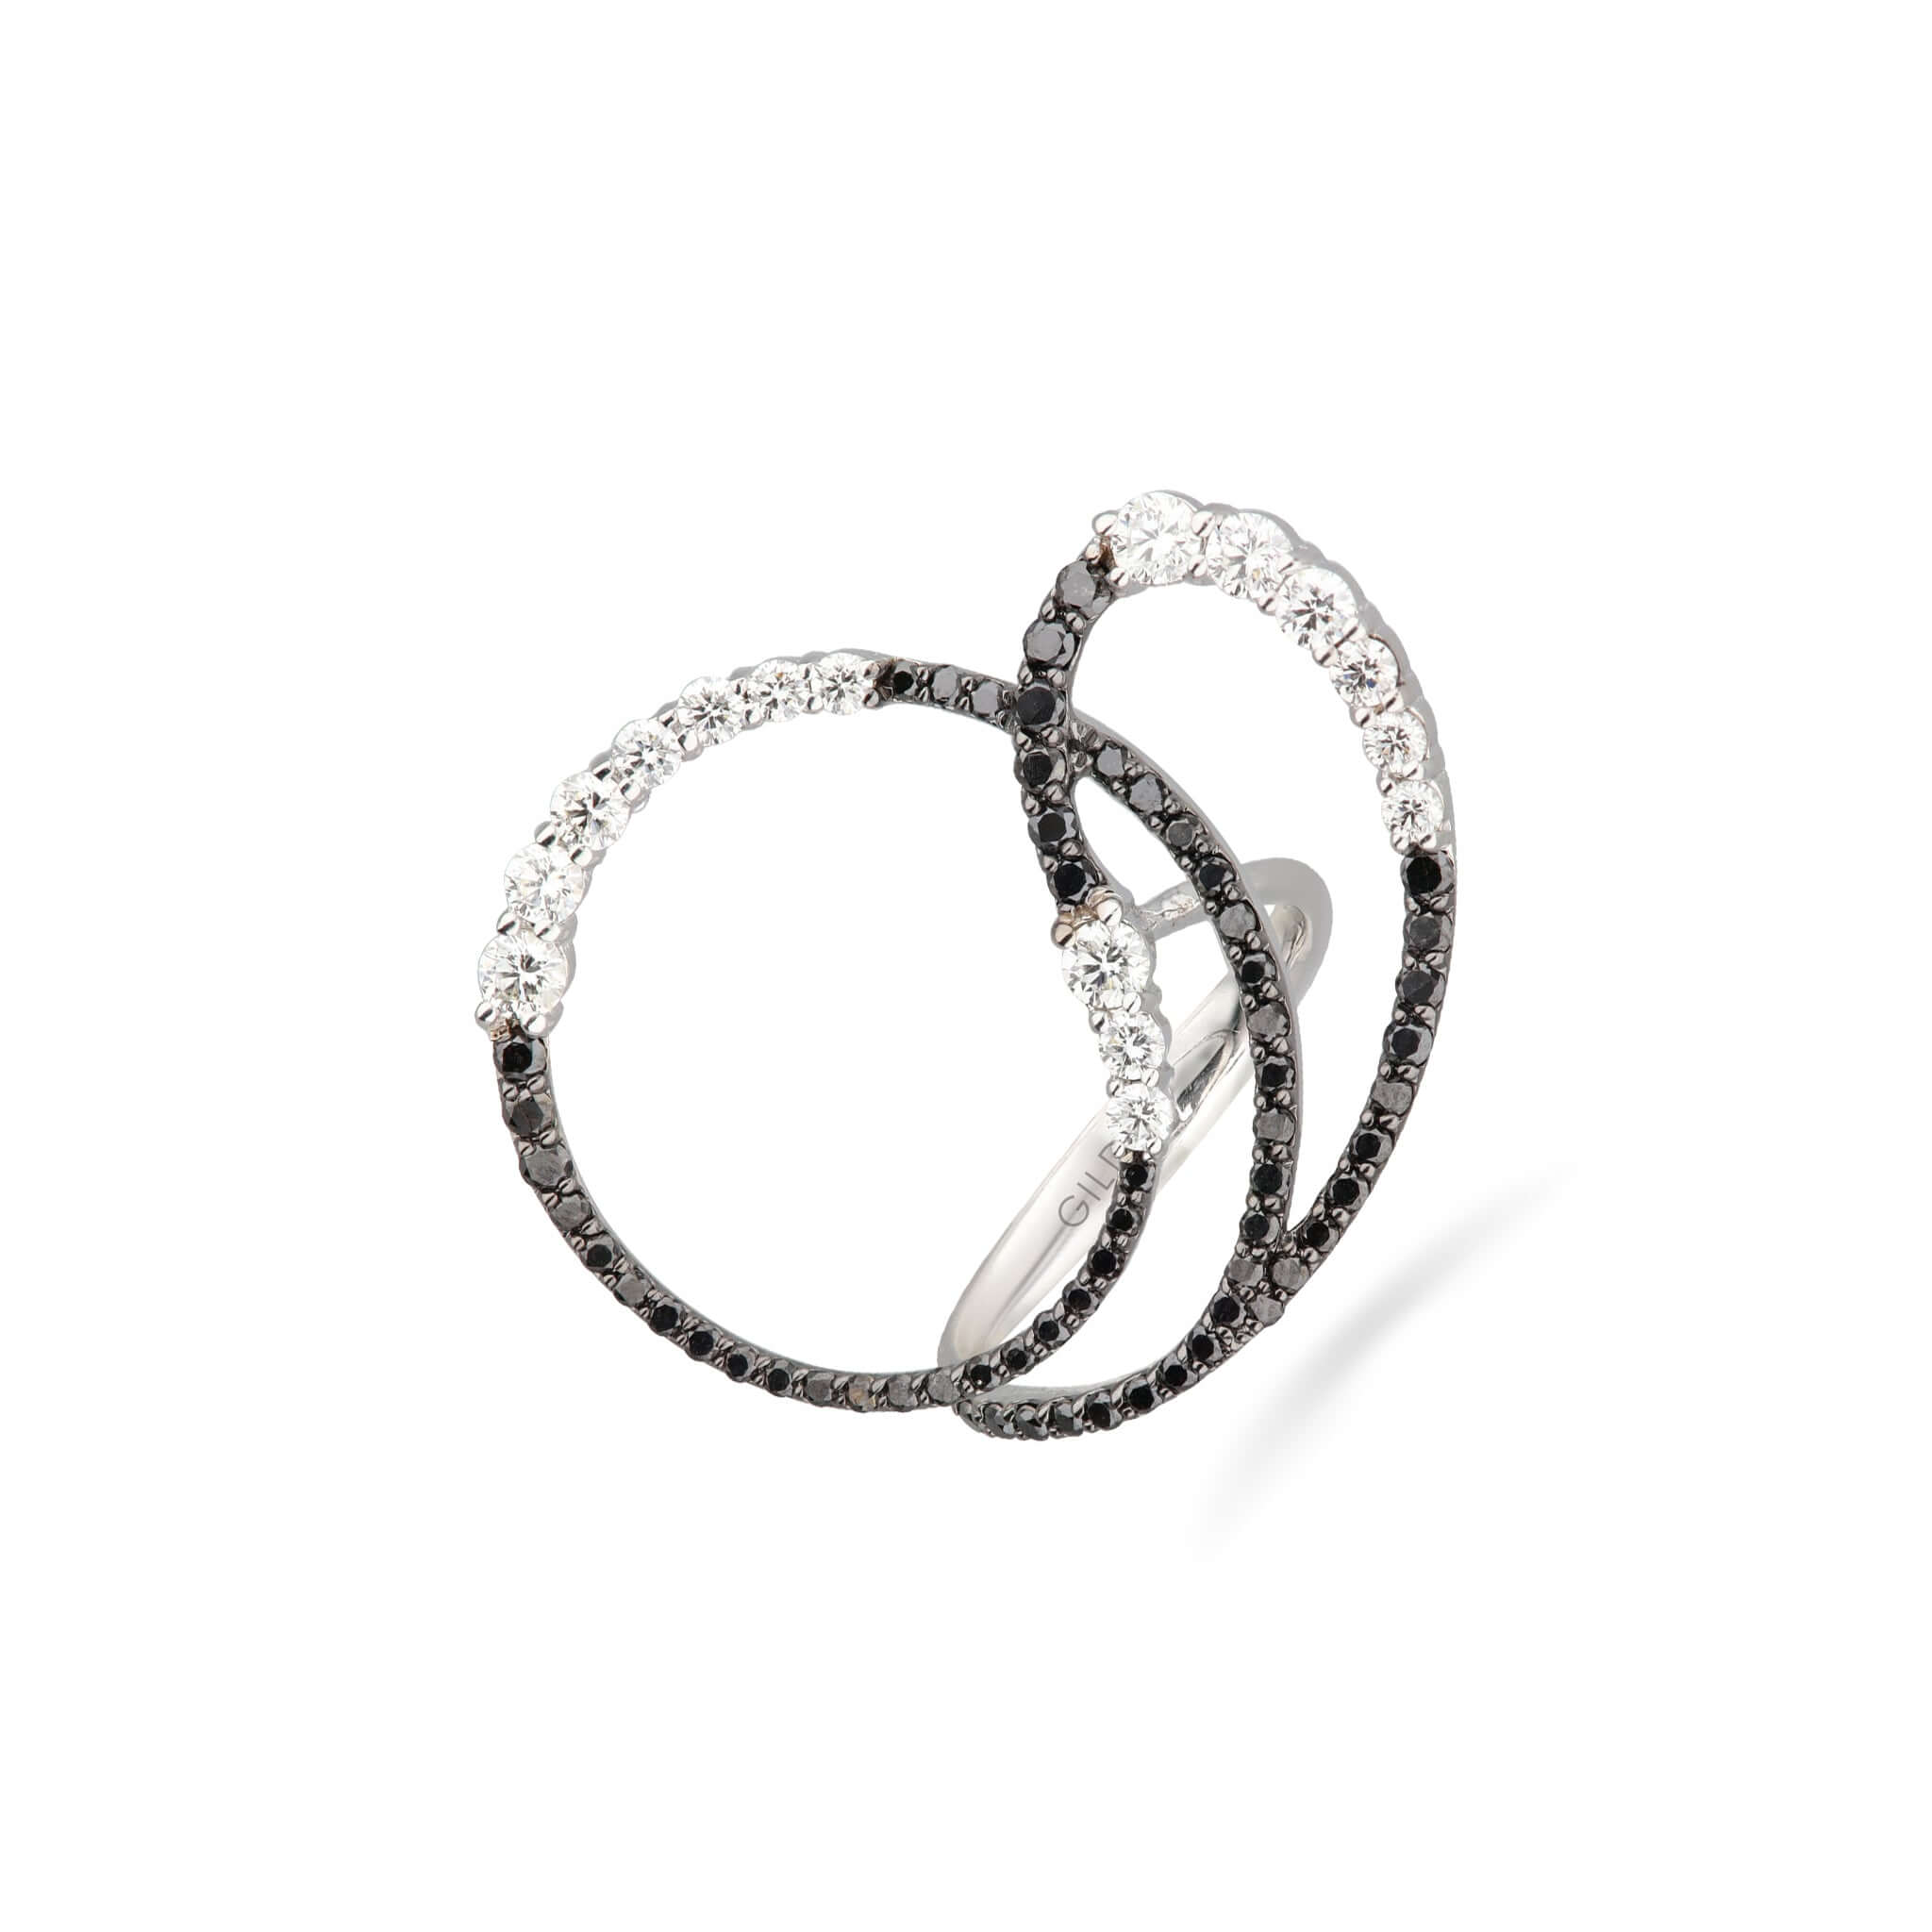 Gilda Jewelry Contemporary | Diamond Ring | 1.32 Cts. | 14K Gold - ring Zengoda Shop online from Artisan Brands